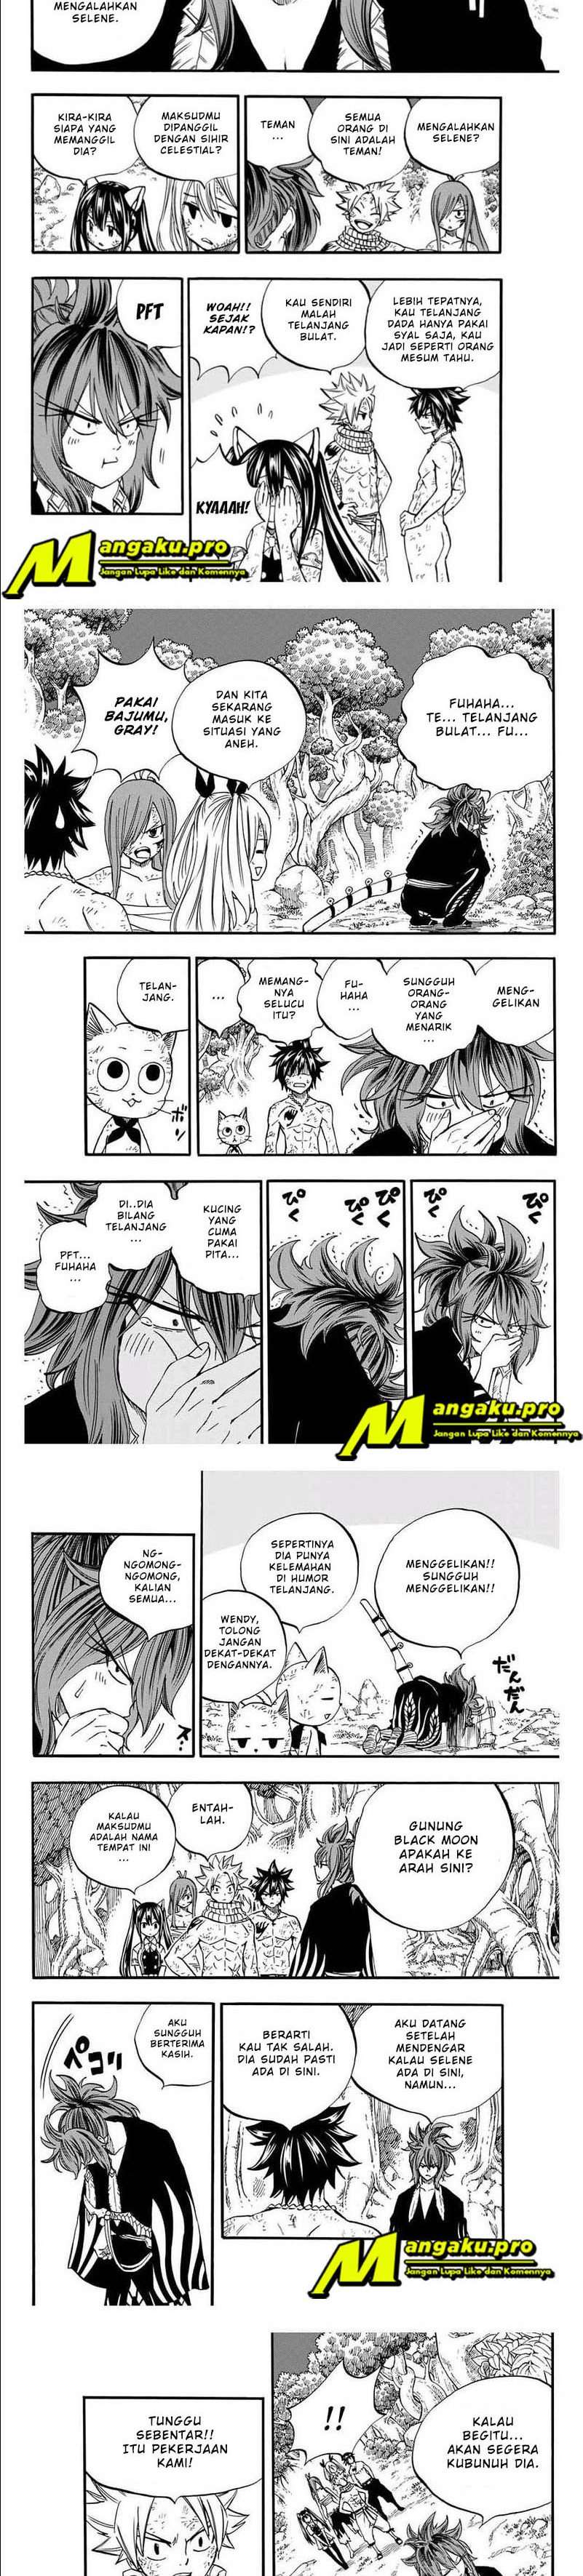 Fairy Tail 100 Years Quest Chapter 80